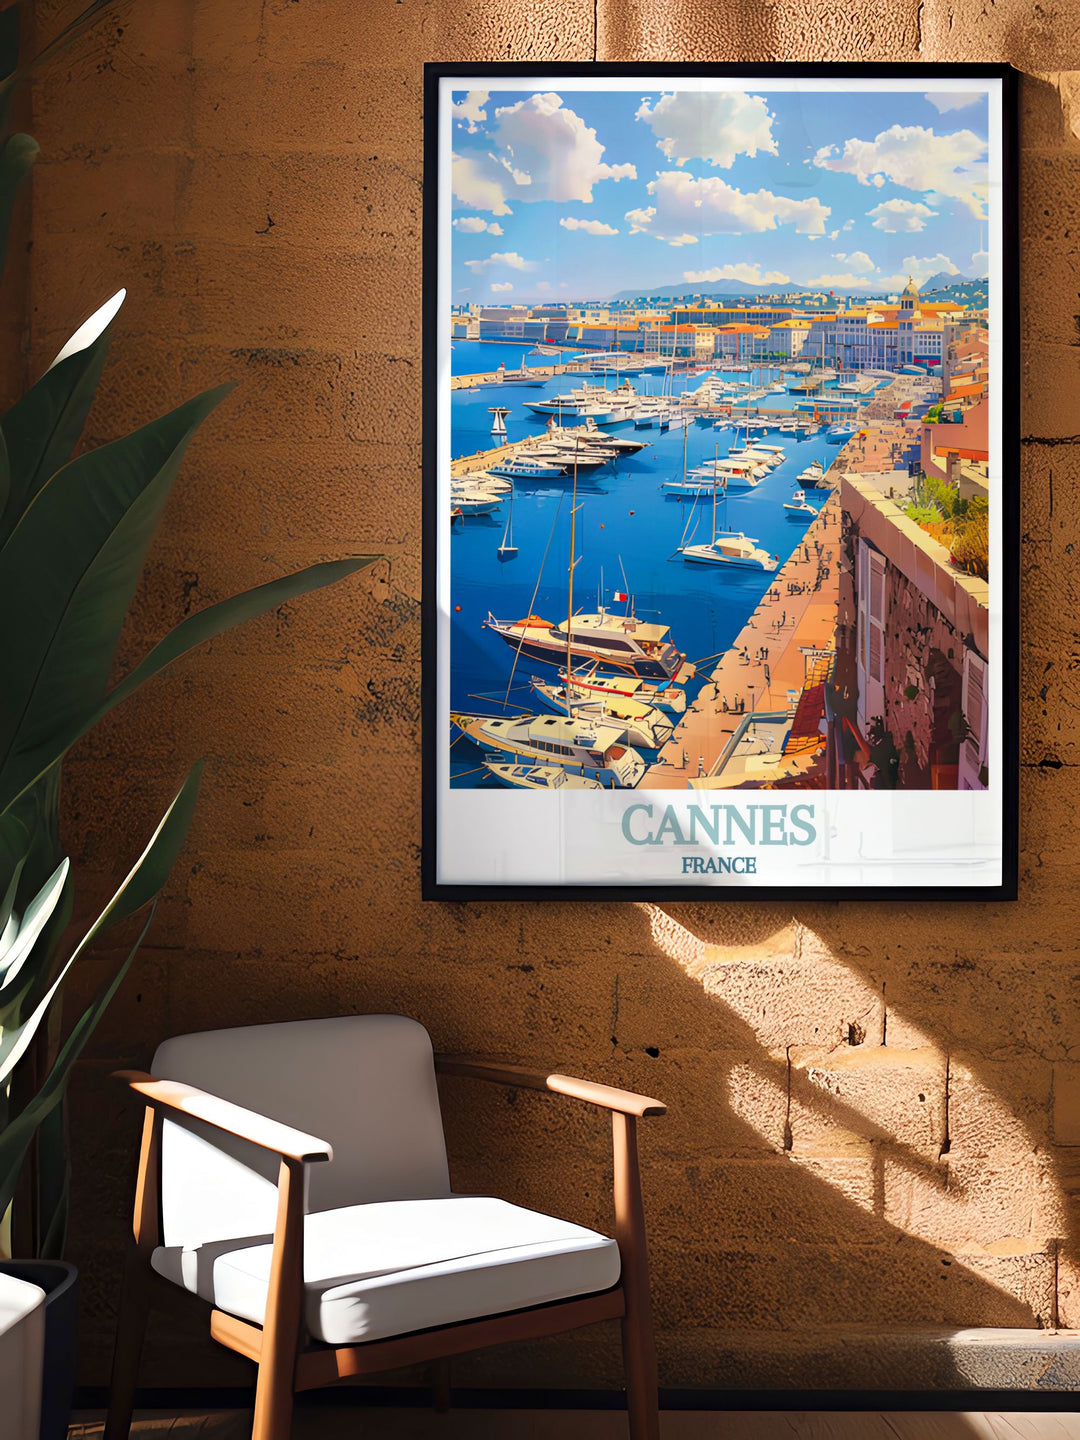 Beautiful Le Vieux Port home decor capturing the vibrant energy of Cannes this France art print is an elegant addition to any interior perfect for those who appreciate France travel art and wish to bring a piece of French elegance into their home